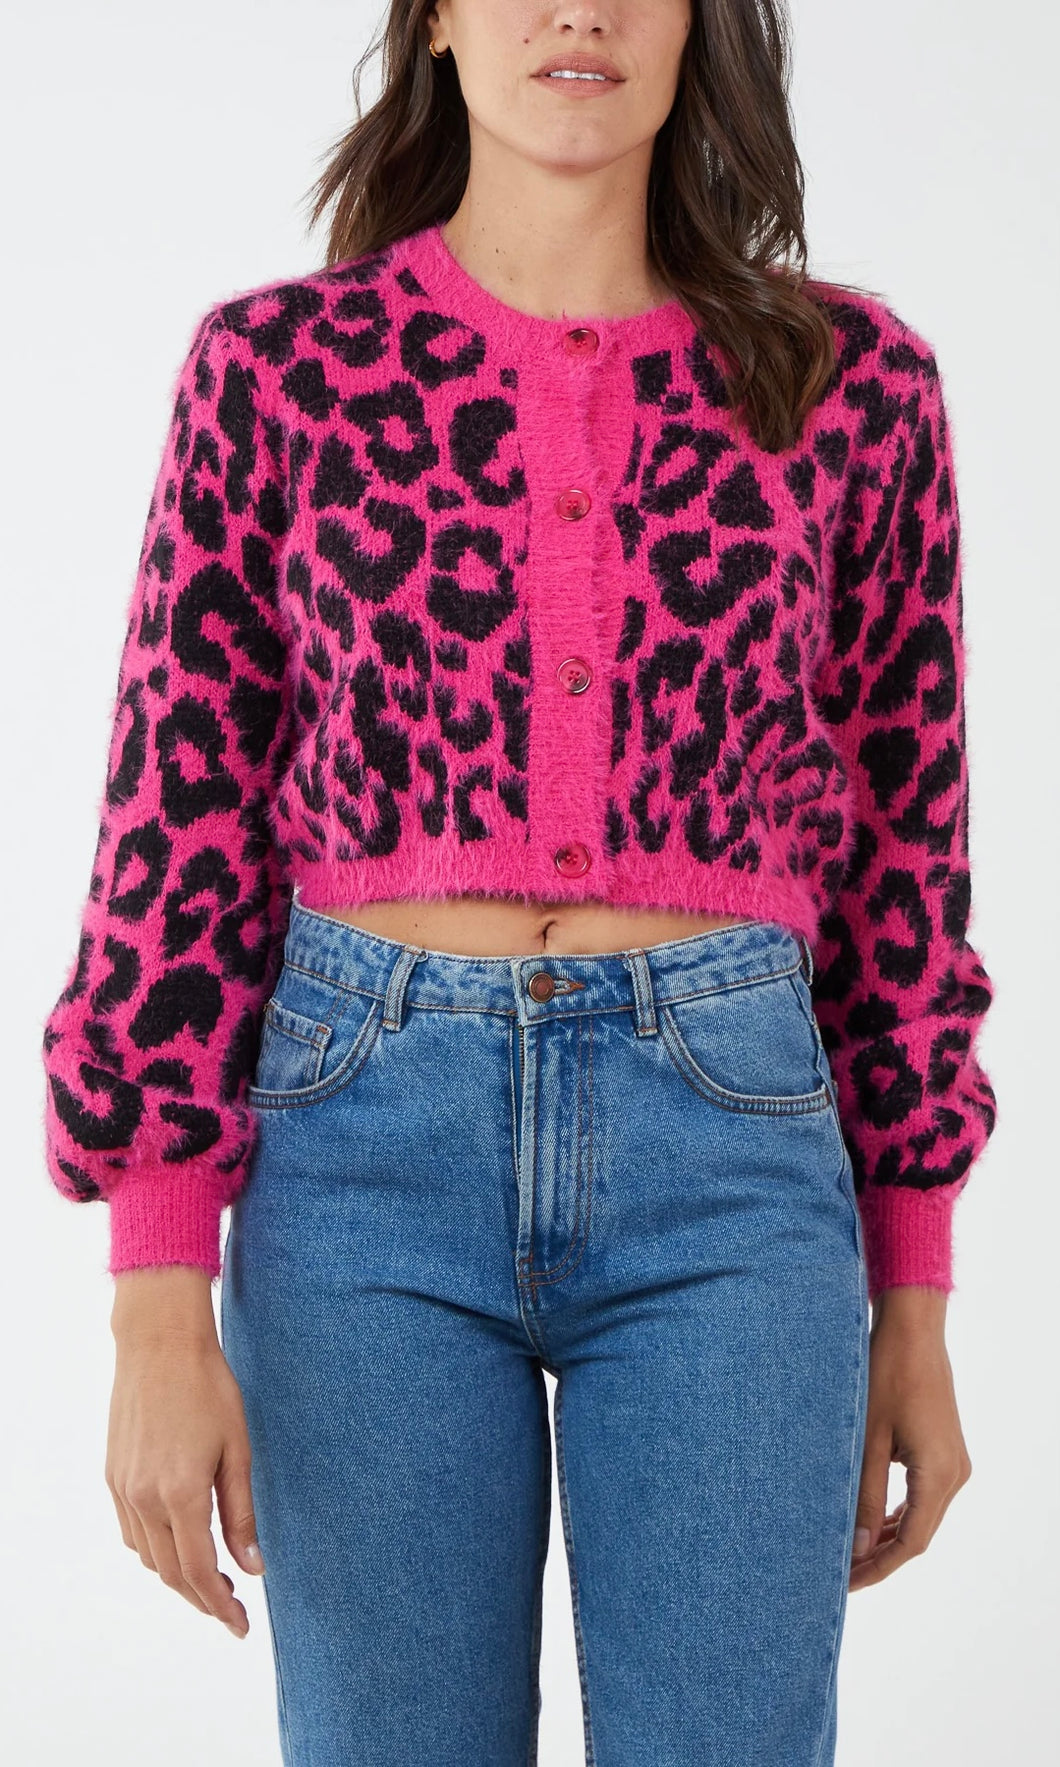 PINK LEOPARD PRINT CROPPED FLUFFY KNIT CARDIGAN